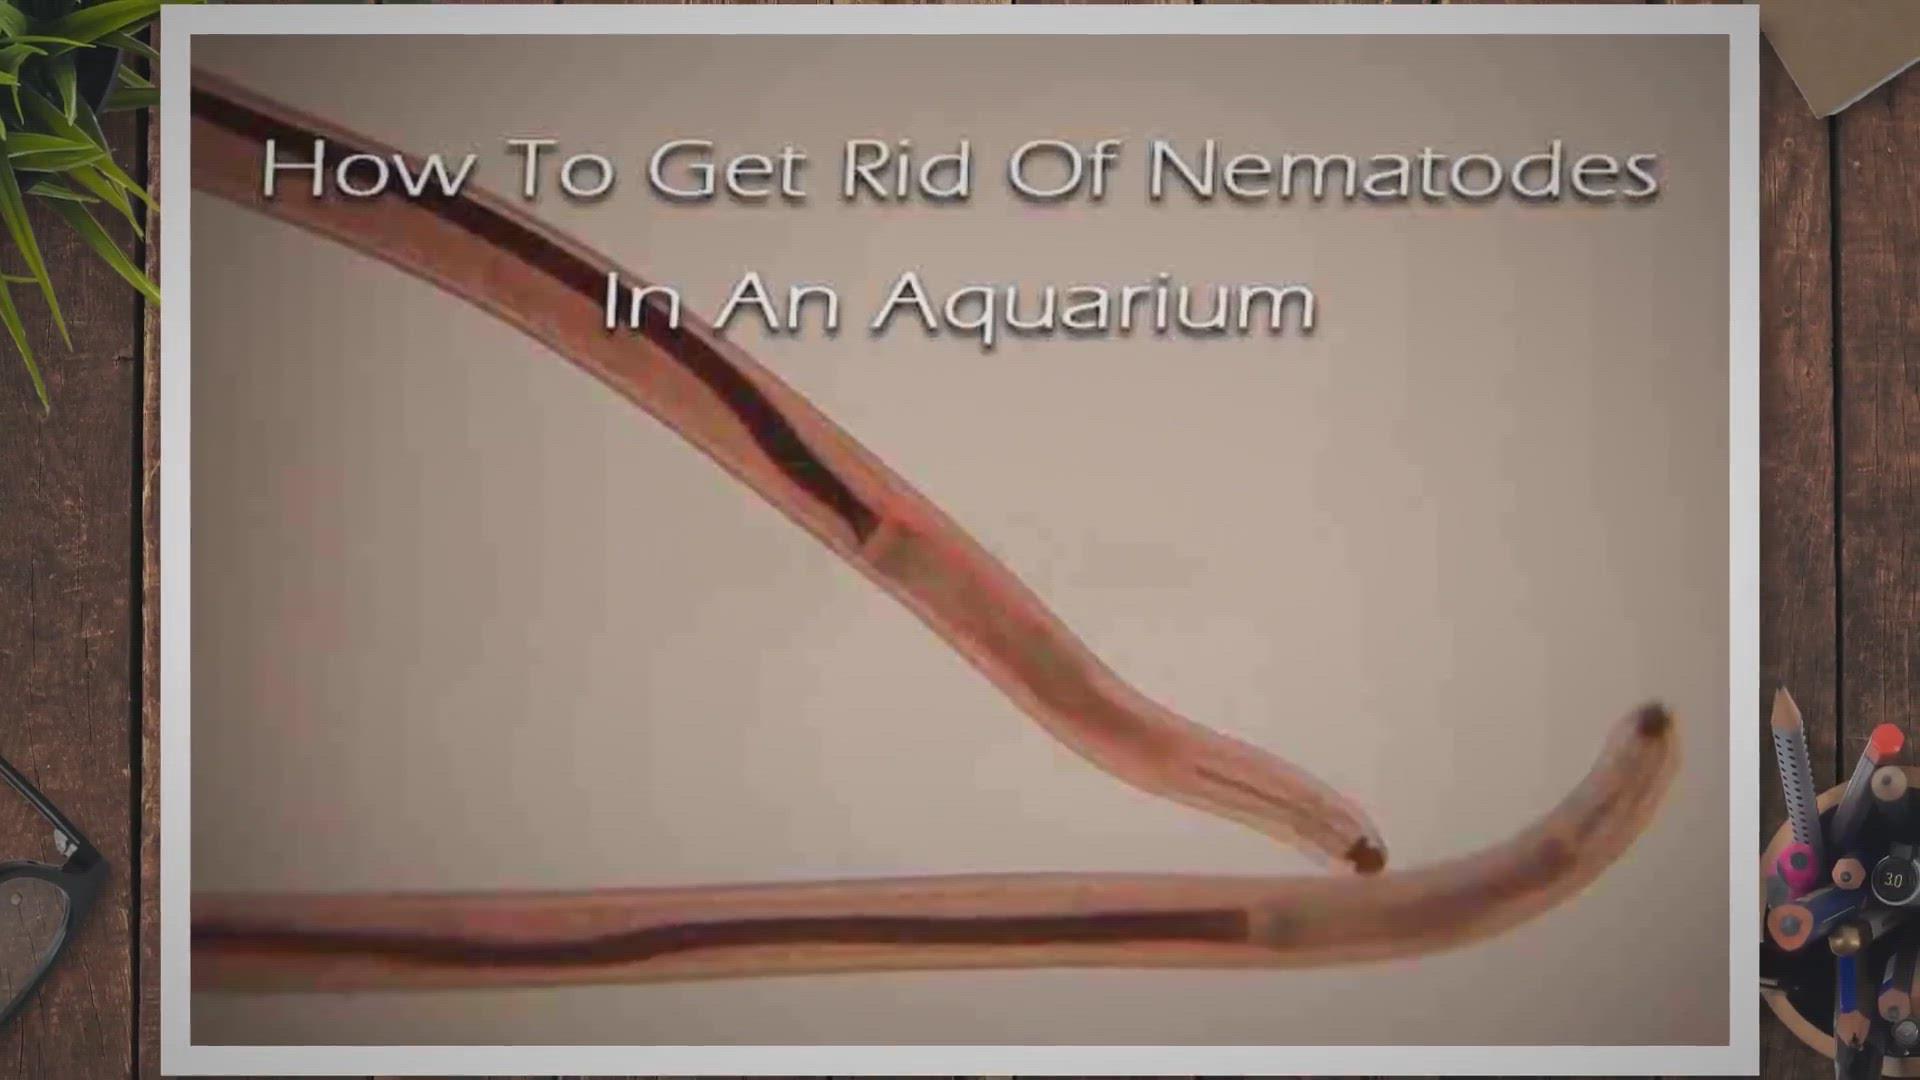 'Video thumbnail for How to Get Rid of Nematode Worms in an Aquarium'